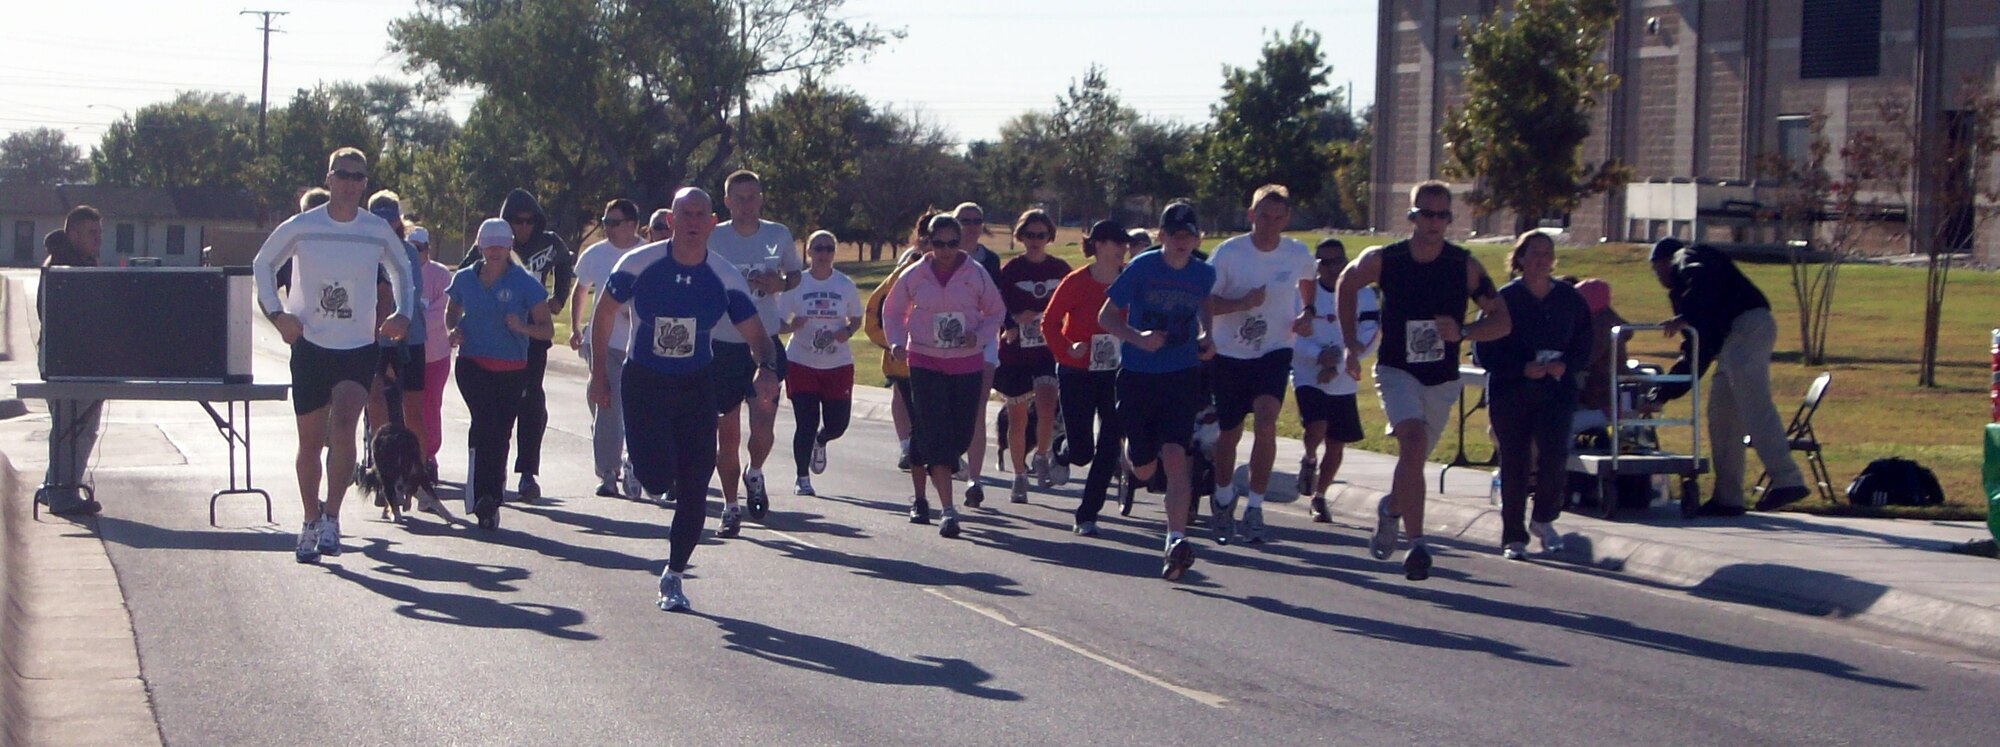 LAUGHLIN AIR FORCE BASE, Texas – November 15, 24 members of Team XL gathered at the Losano Fitness Center here to participate in the Turkey Trot 5K Fun Run.  (Contributed photo)